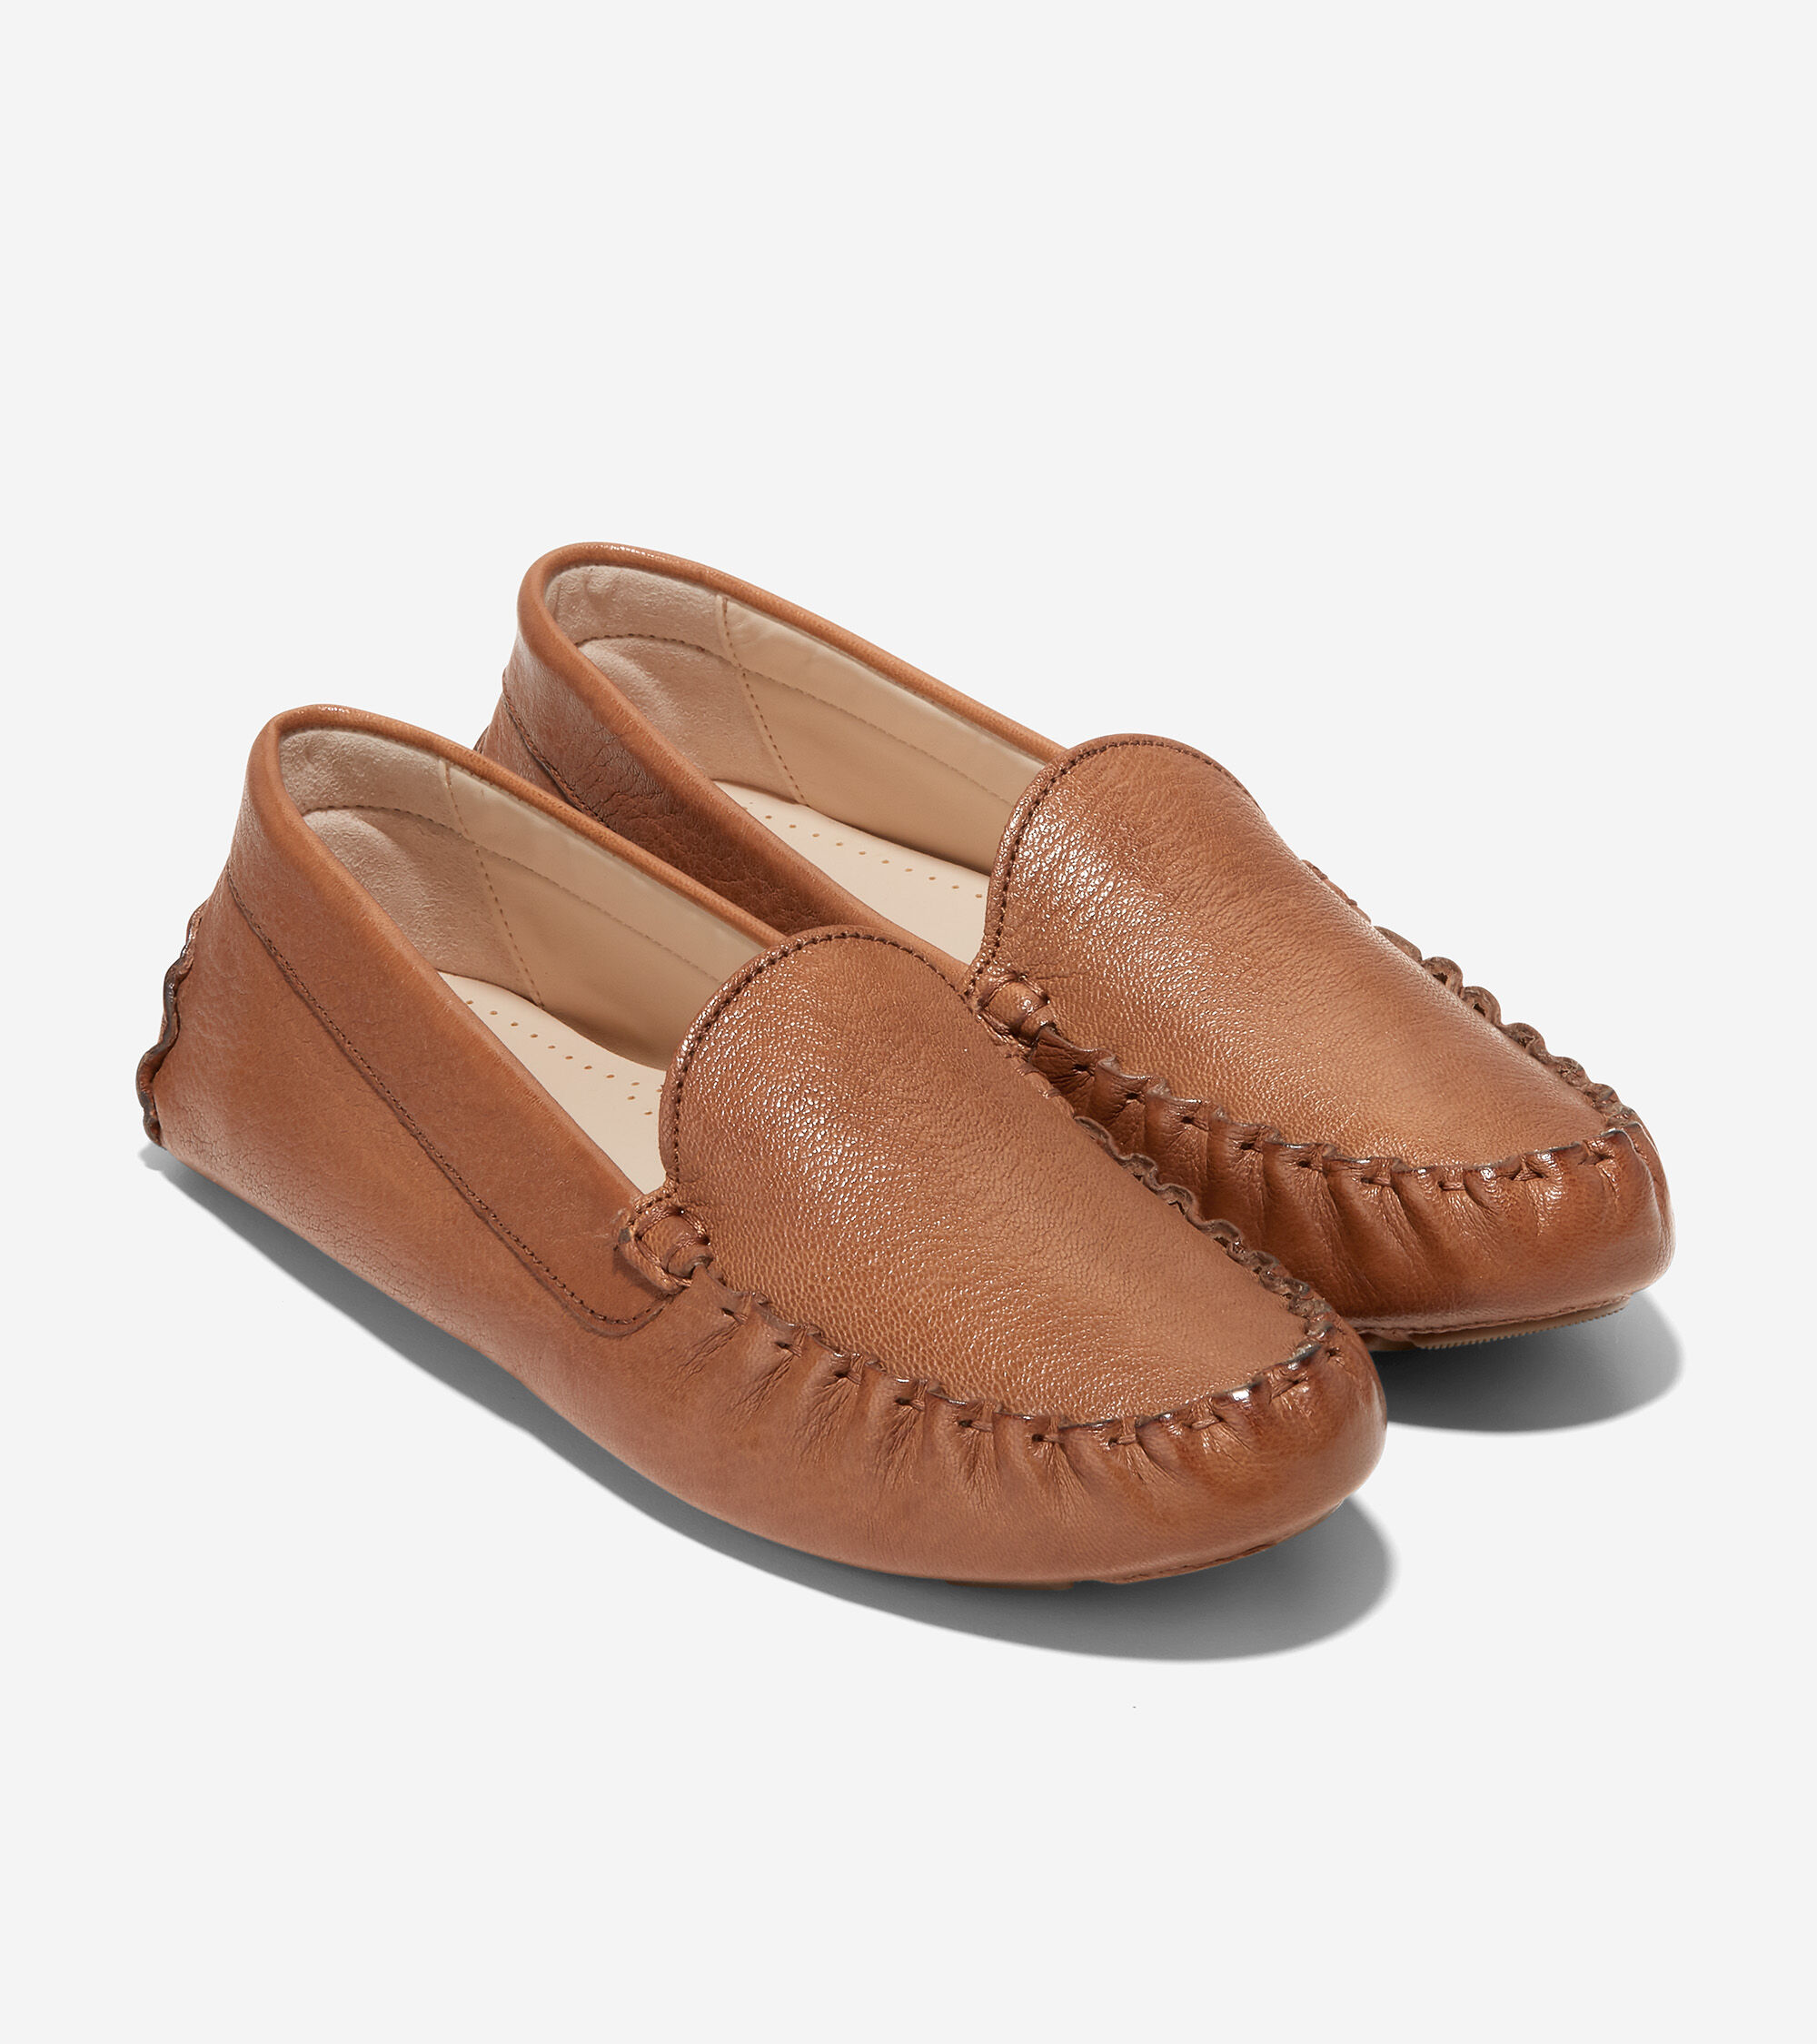 evelyn driver cole haan